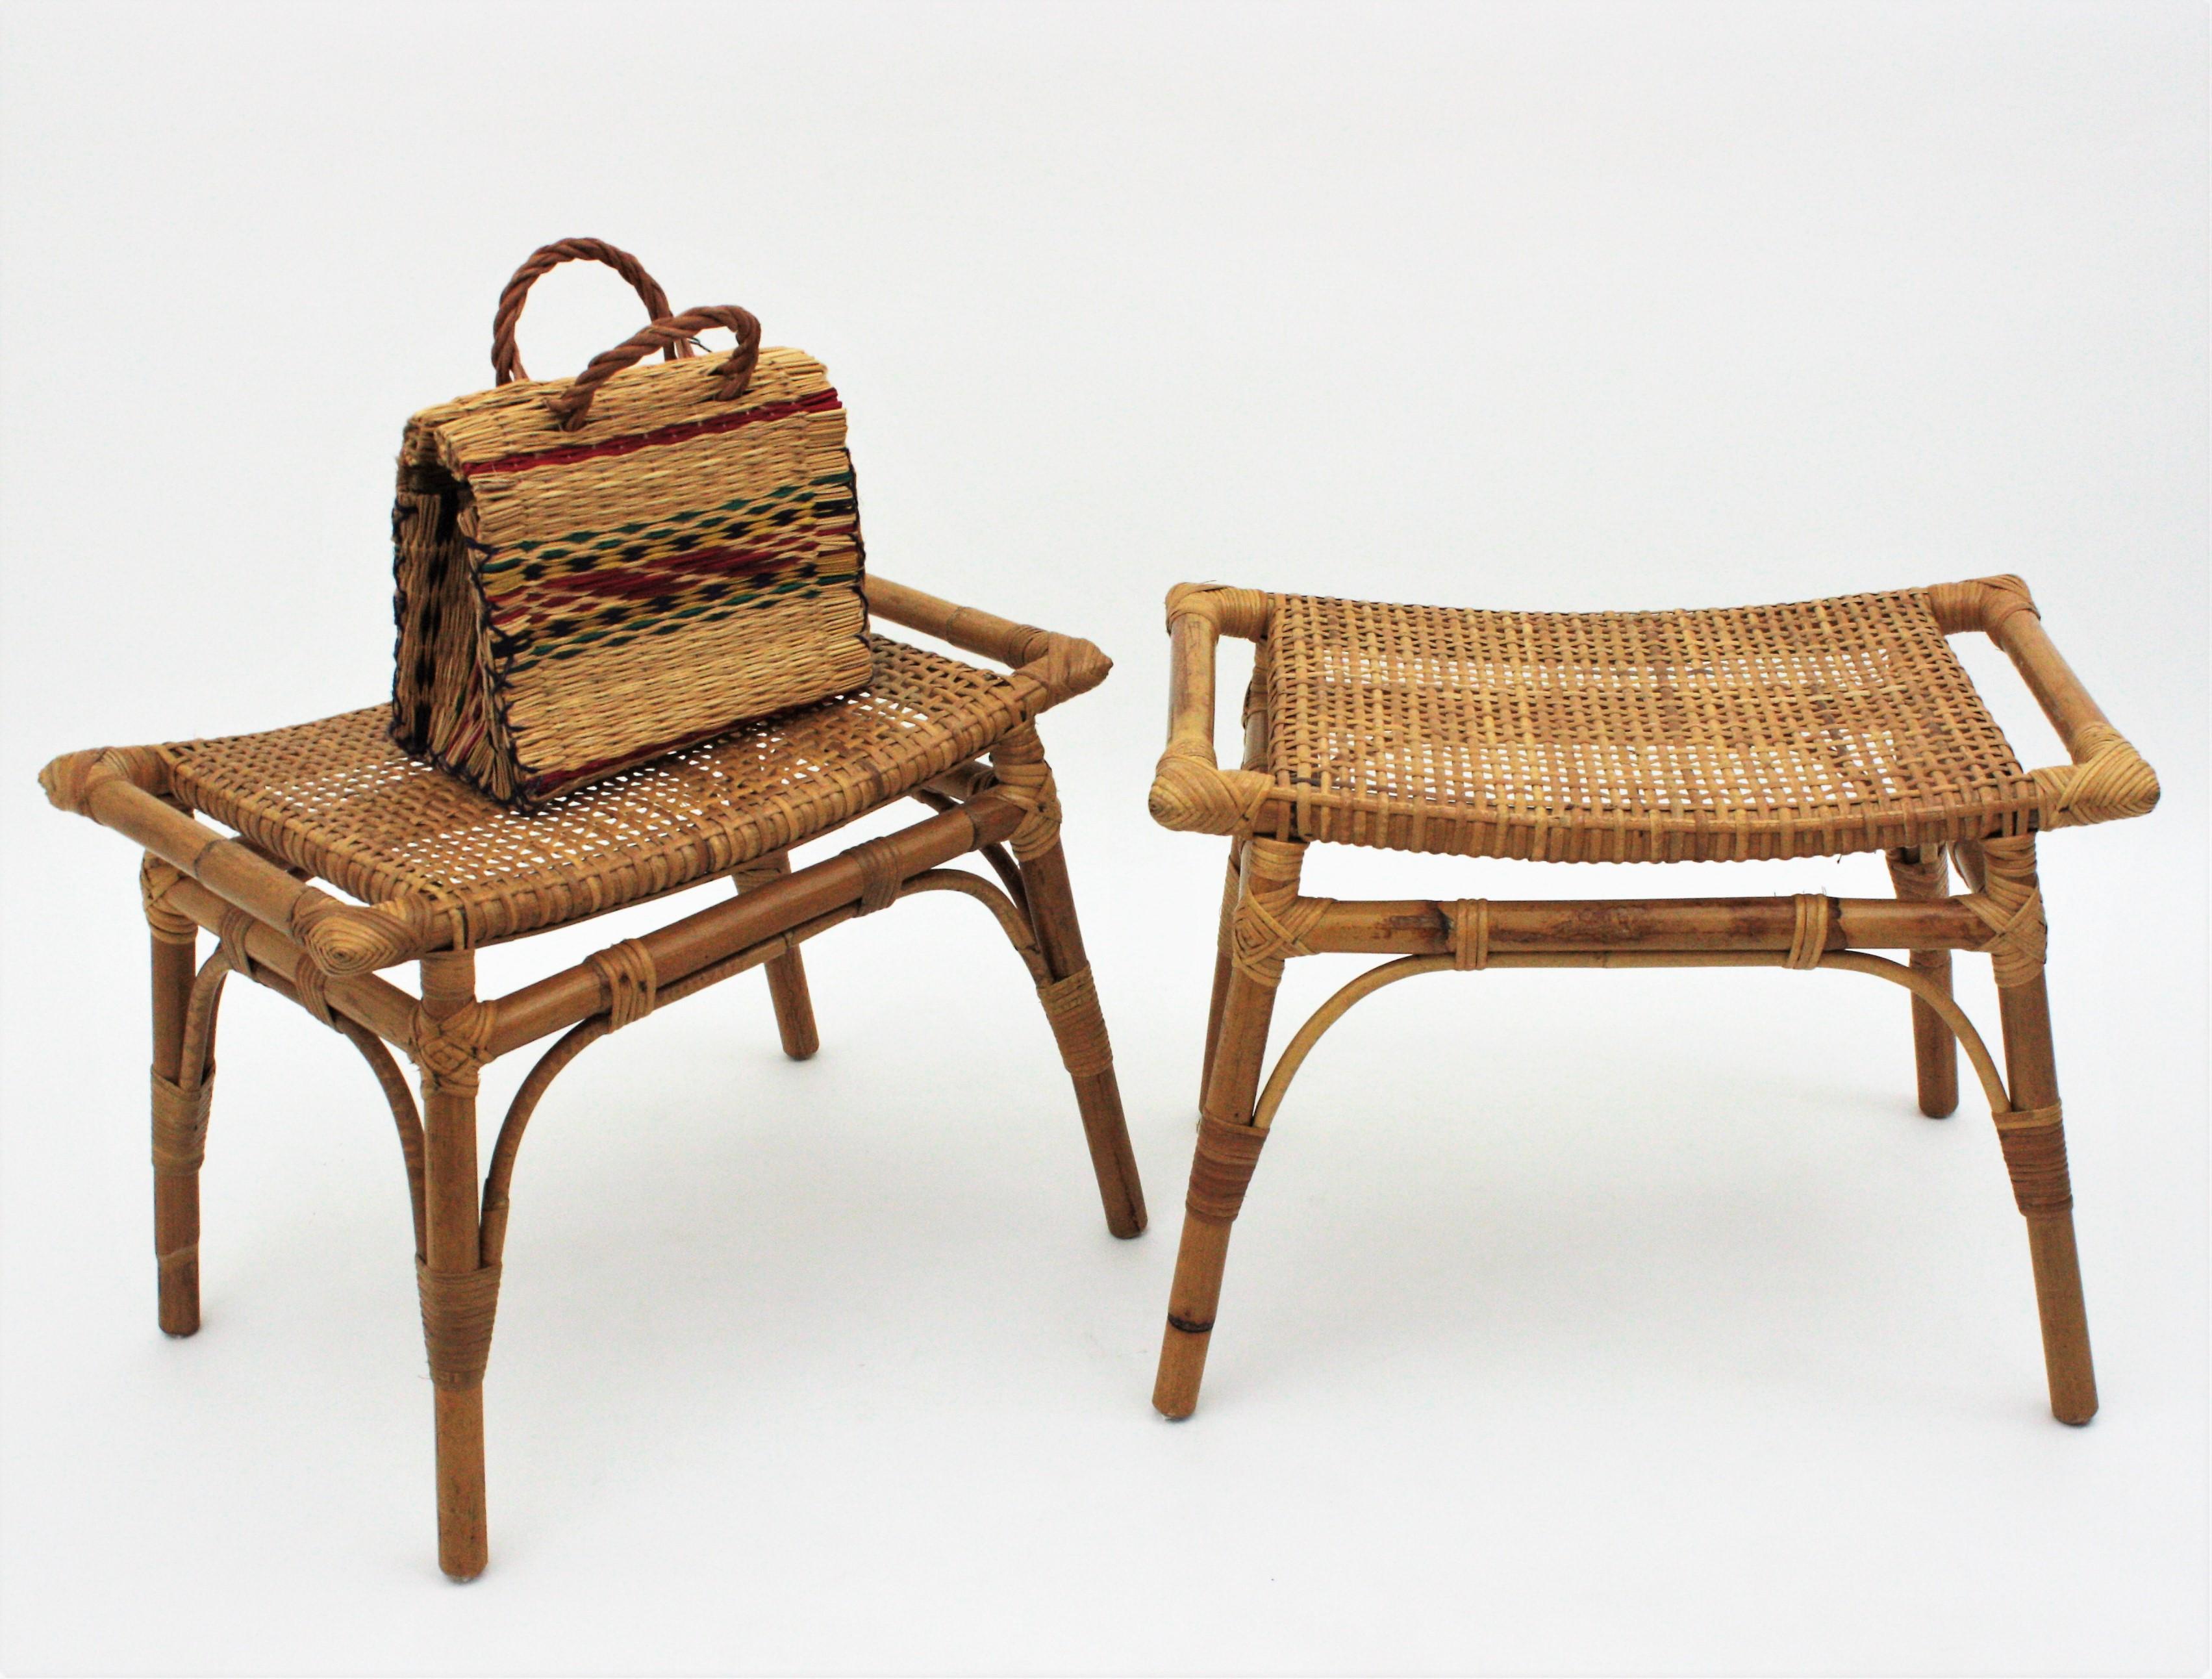 Pair of Bamboo Stools, Benches or Ottoman with Woven Wicker Cane Seats 7